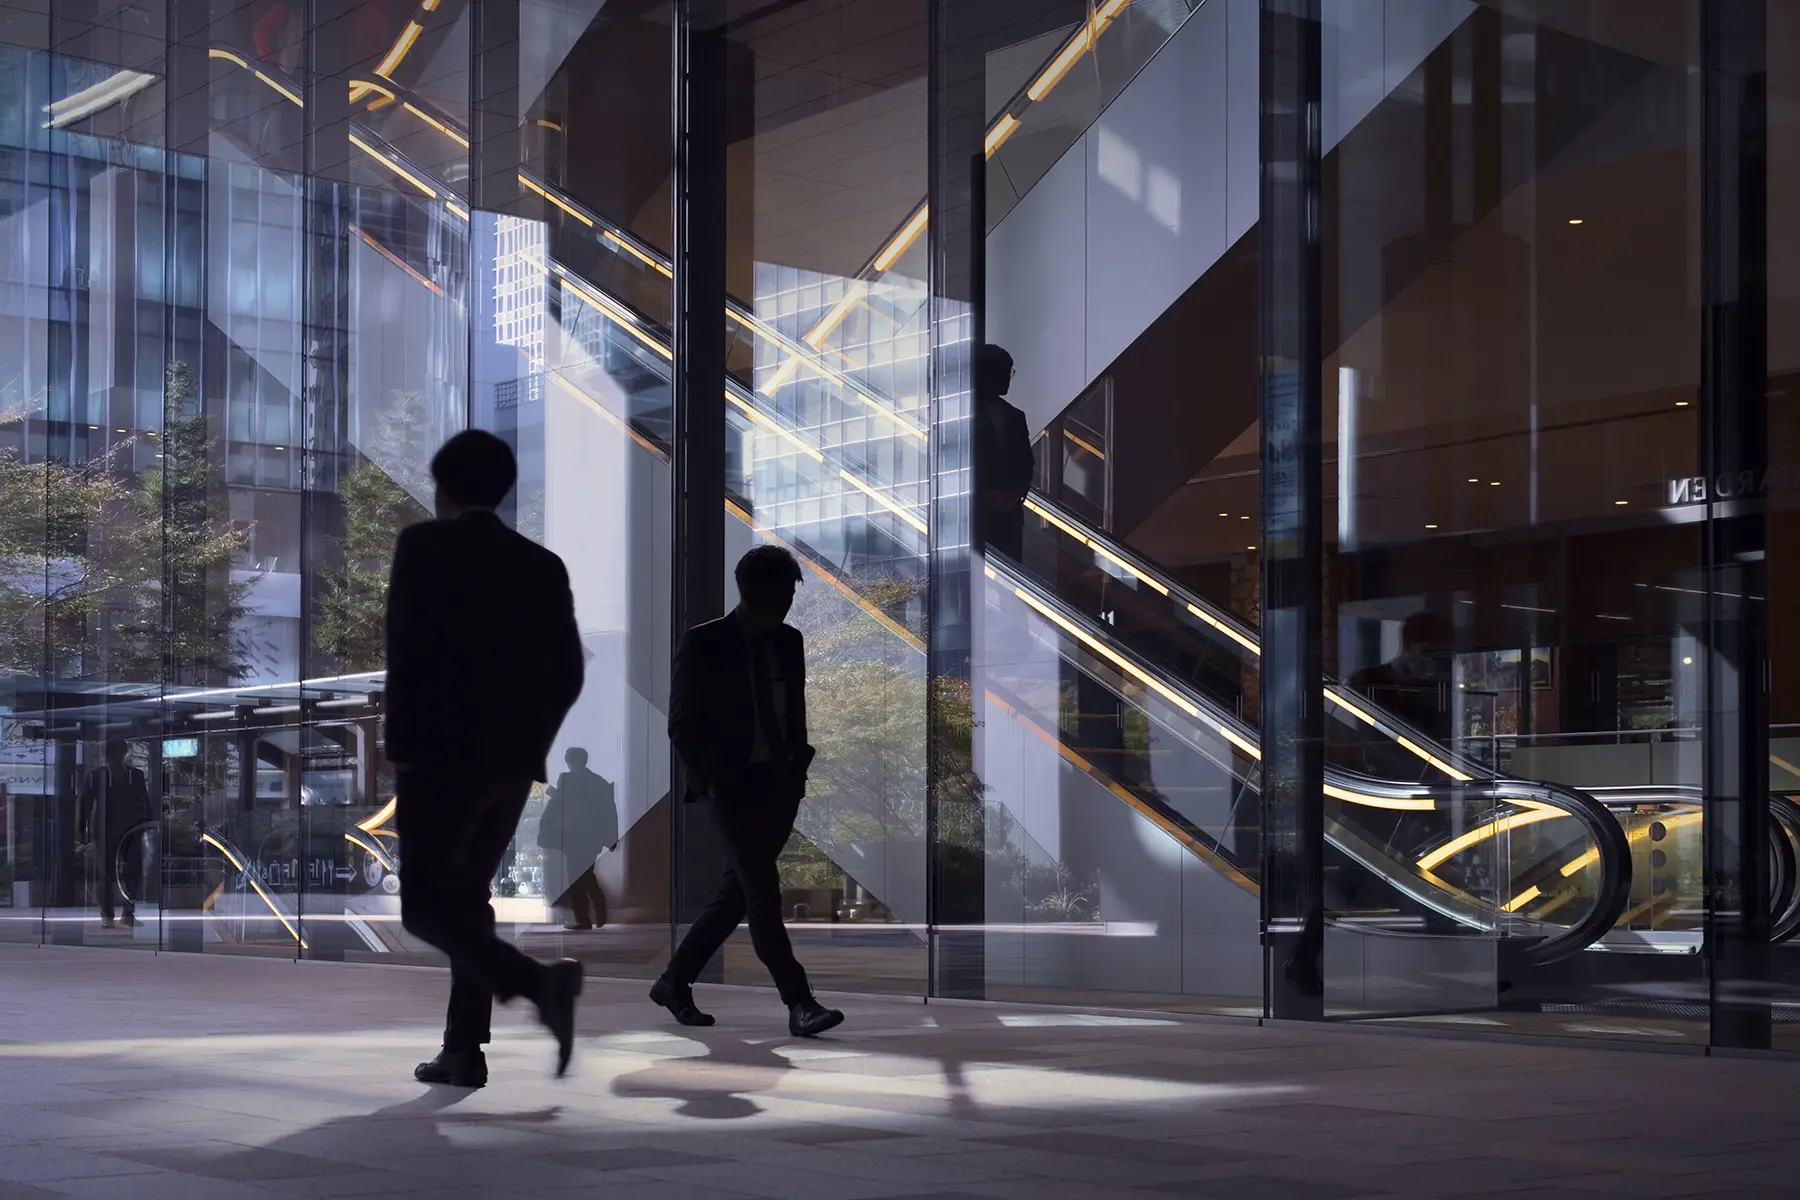 Silhouettes of office workers walking around in a office lobby with large windows and escalators